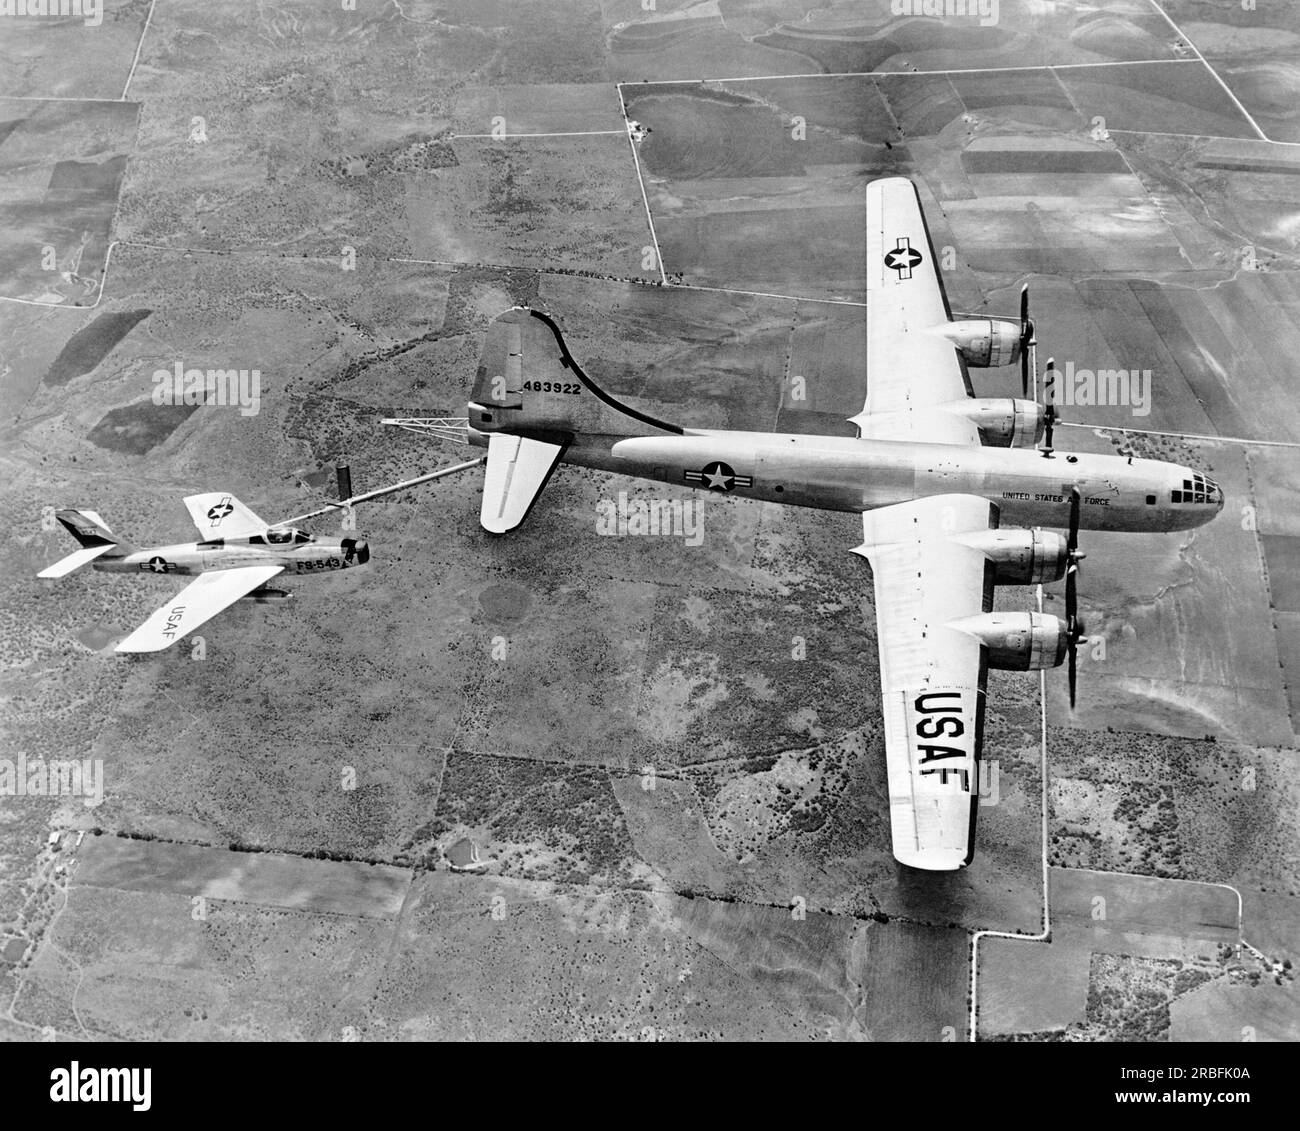 United States:  1950 A Republic F-84F Thunderstreak fighter-bomber gets refueled in flight from a Boeing tanker plane Stock Photo